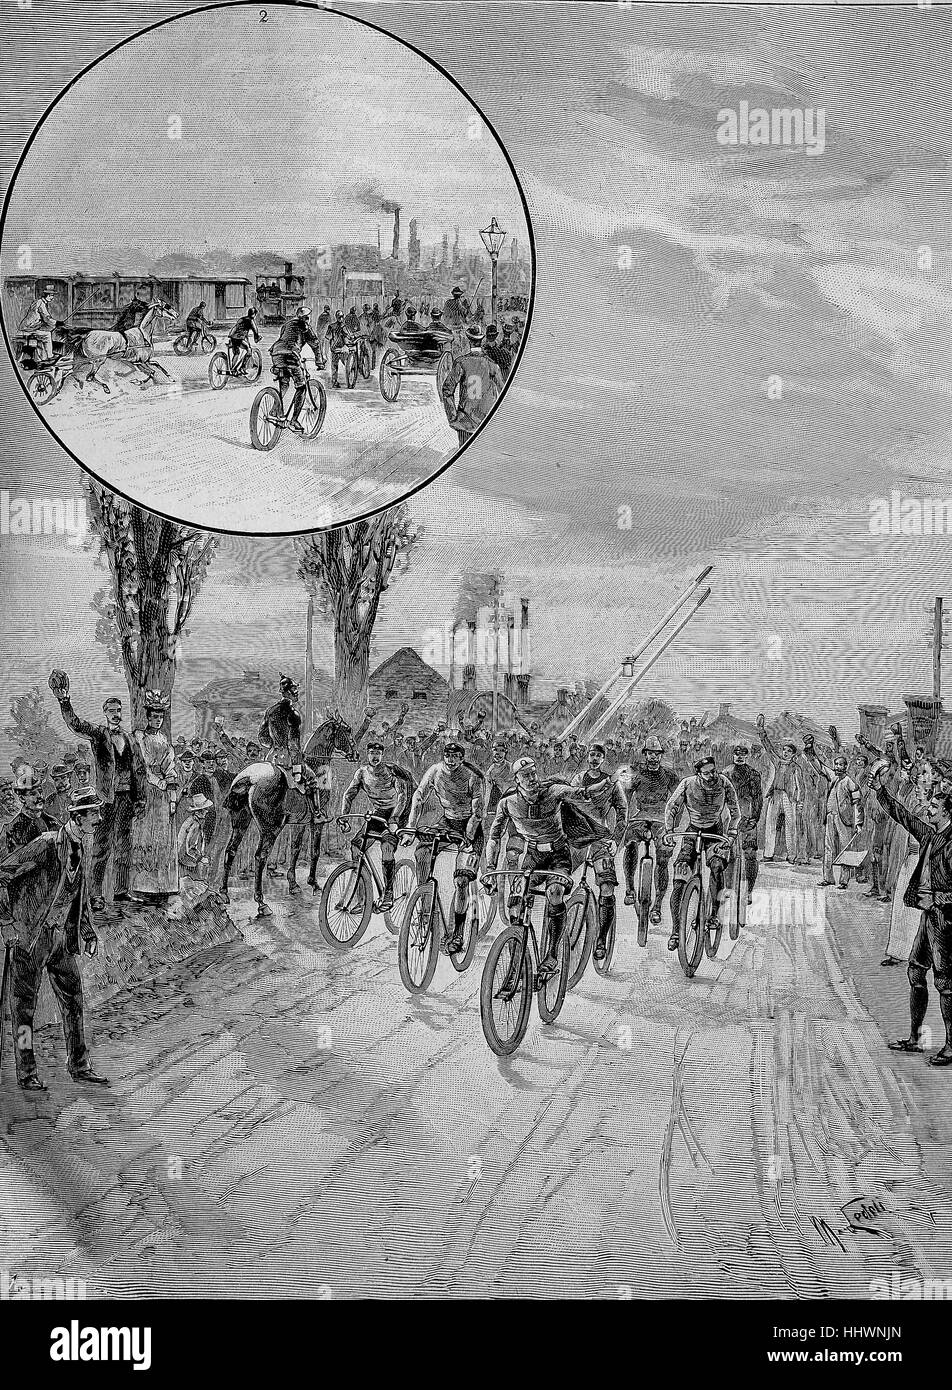 Distance-cycling Vienna - Berlin took place from 29 June to 30 June 1893, drawing by M. Ledeli, Austria, historical image or illustration, published 1890, digital improved Stock Photo